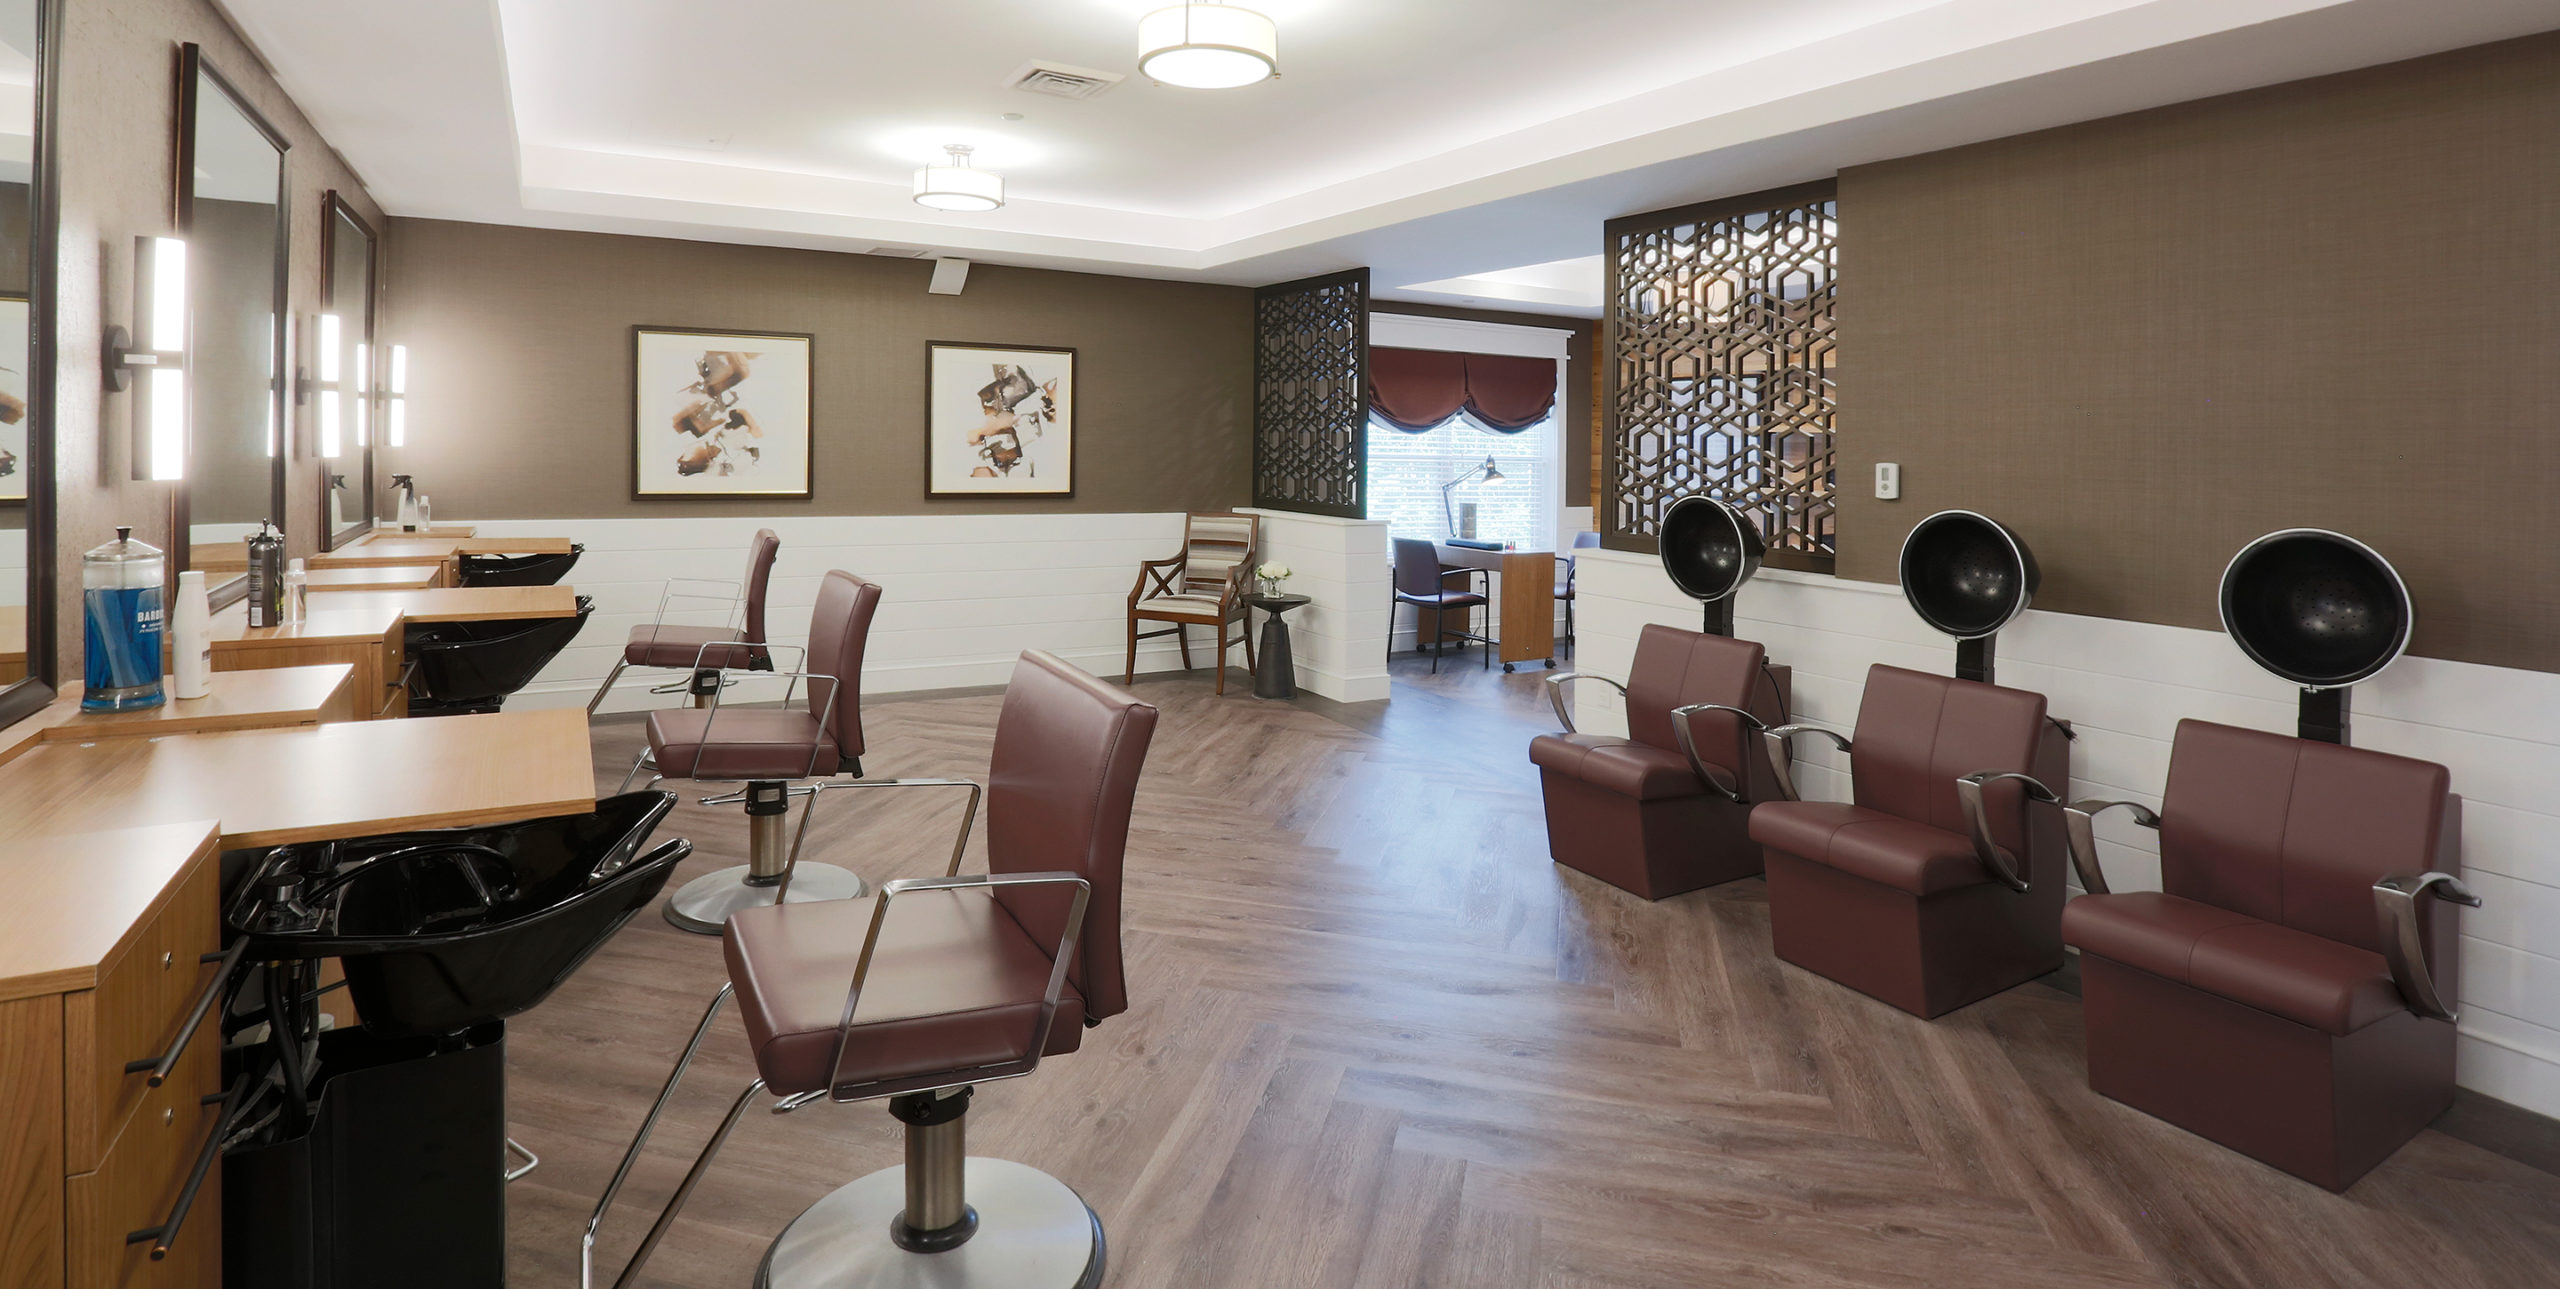 Salon room at Brightview Senior Living in Sayville, NY